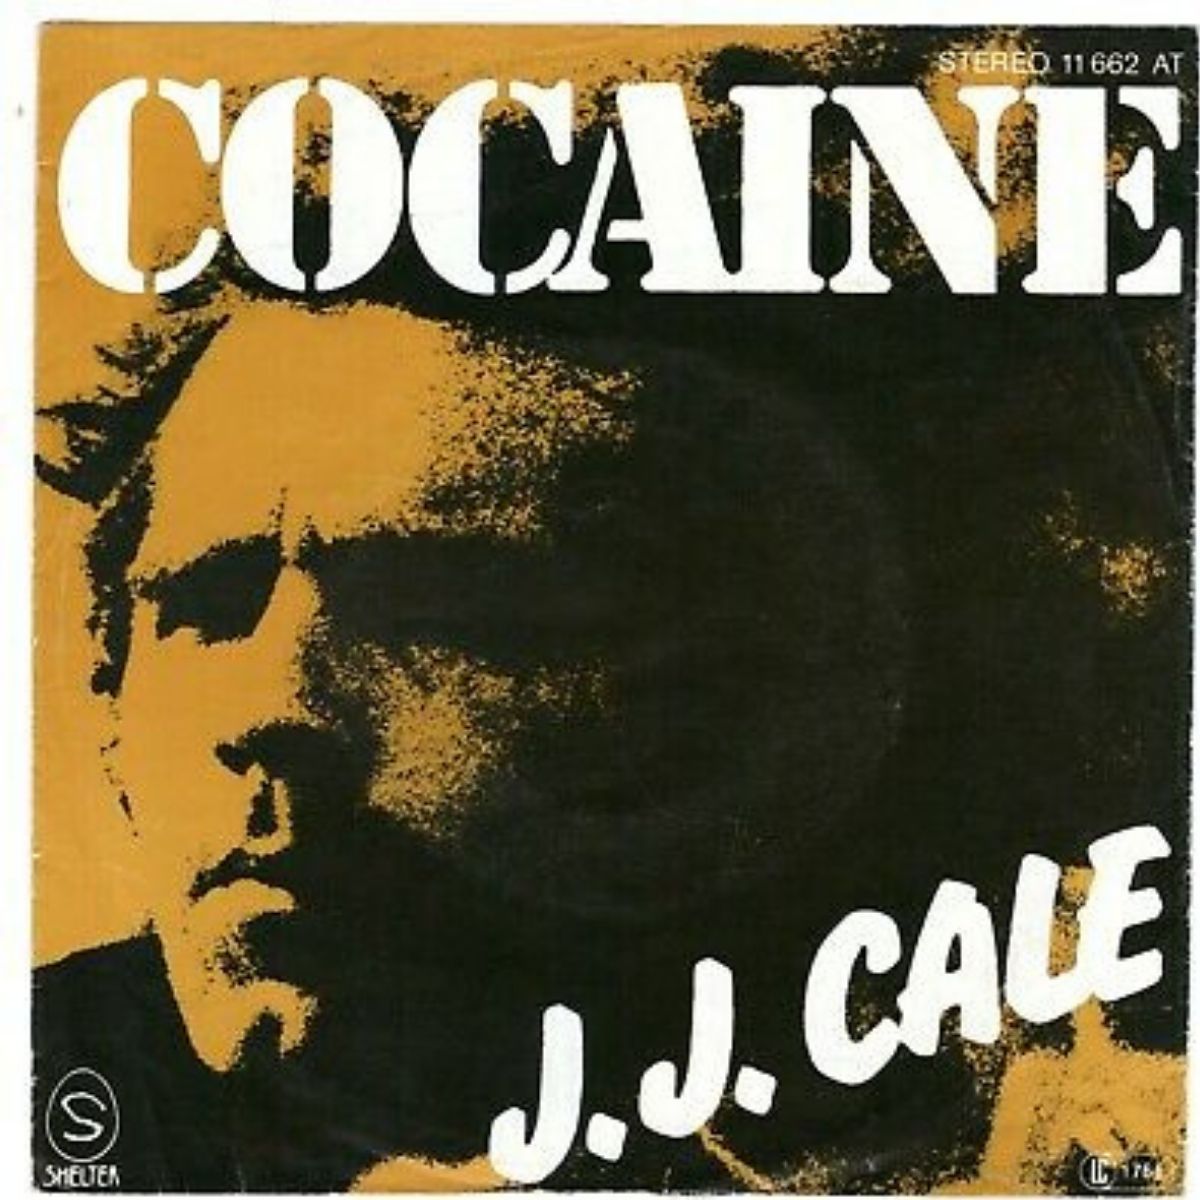 "Cocaine" cover by JJ Cale